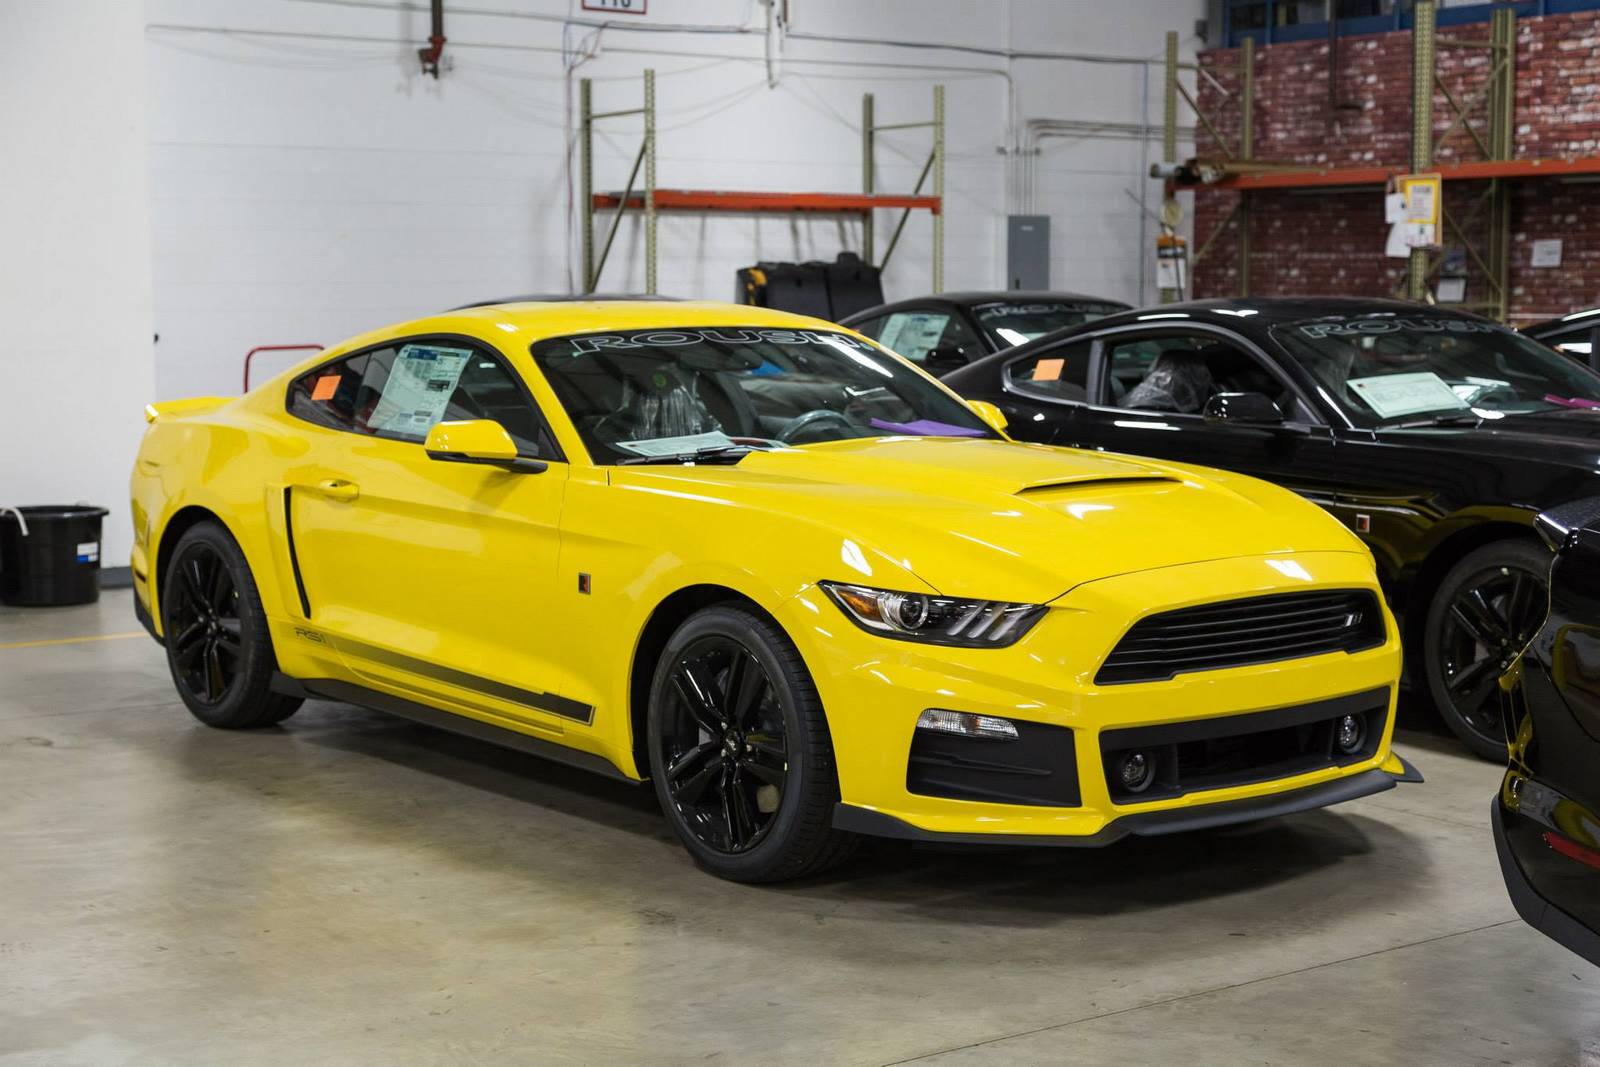 Roush Reveals First Batch of Production Ready 2015 RS Mustangs - GTspirit